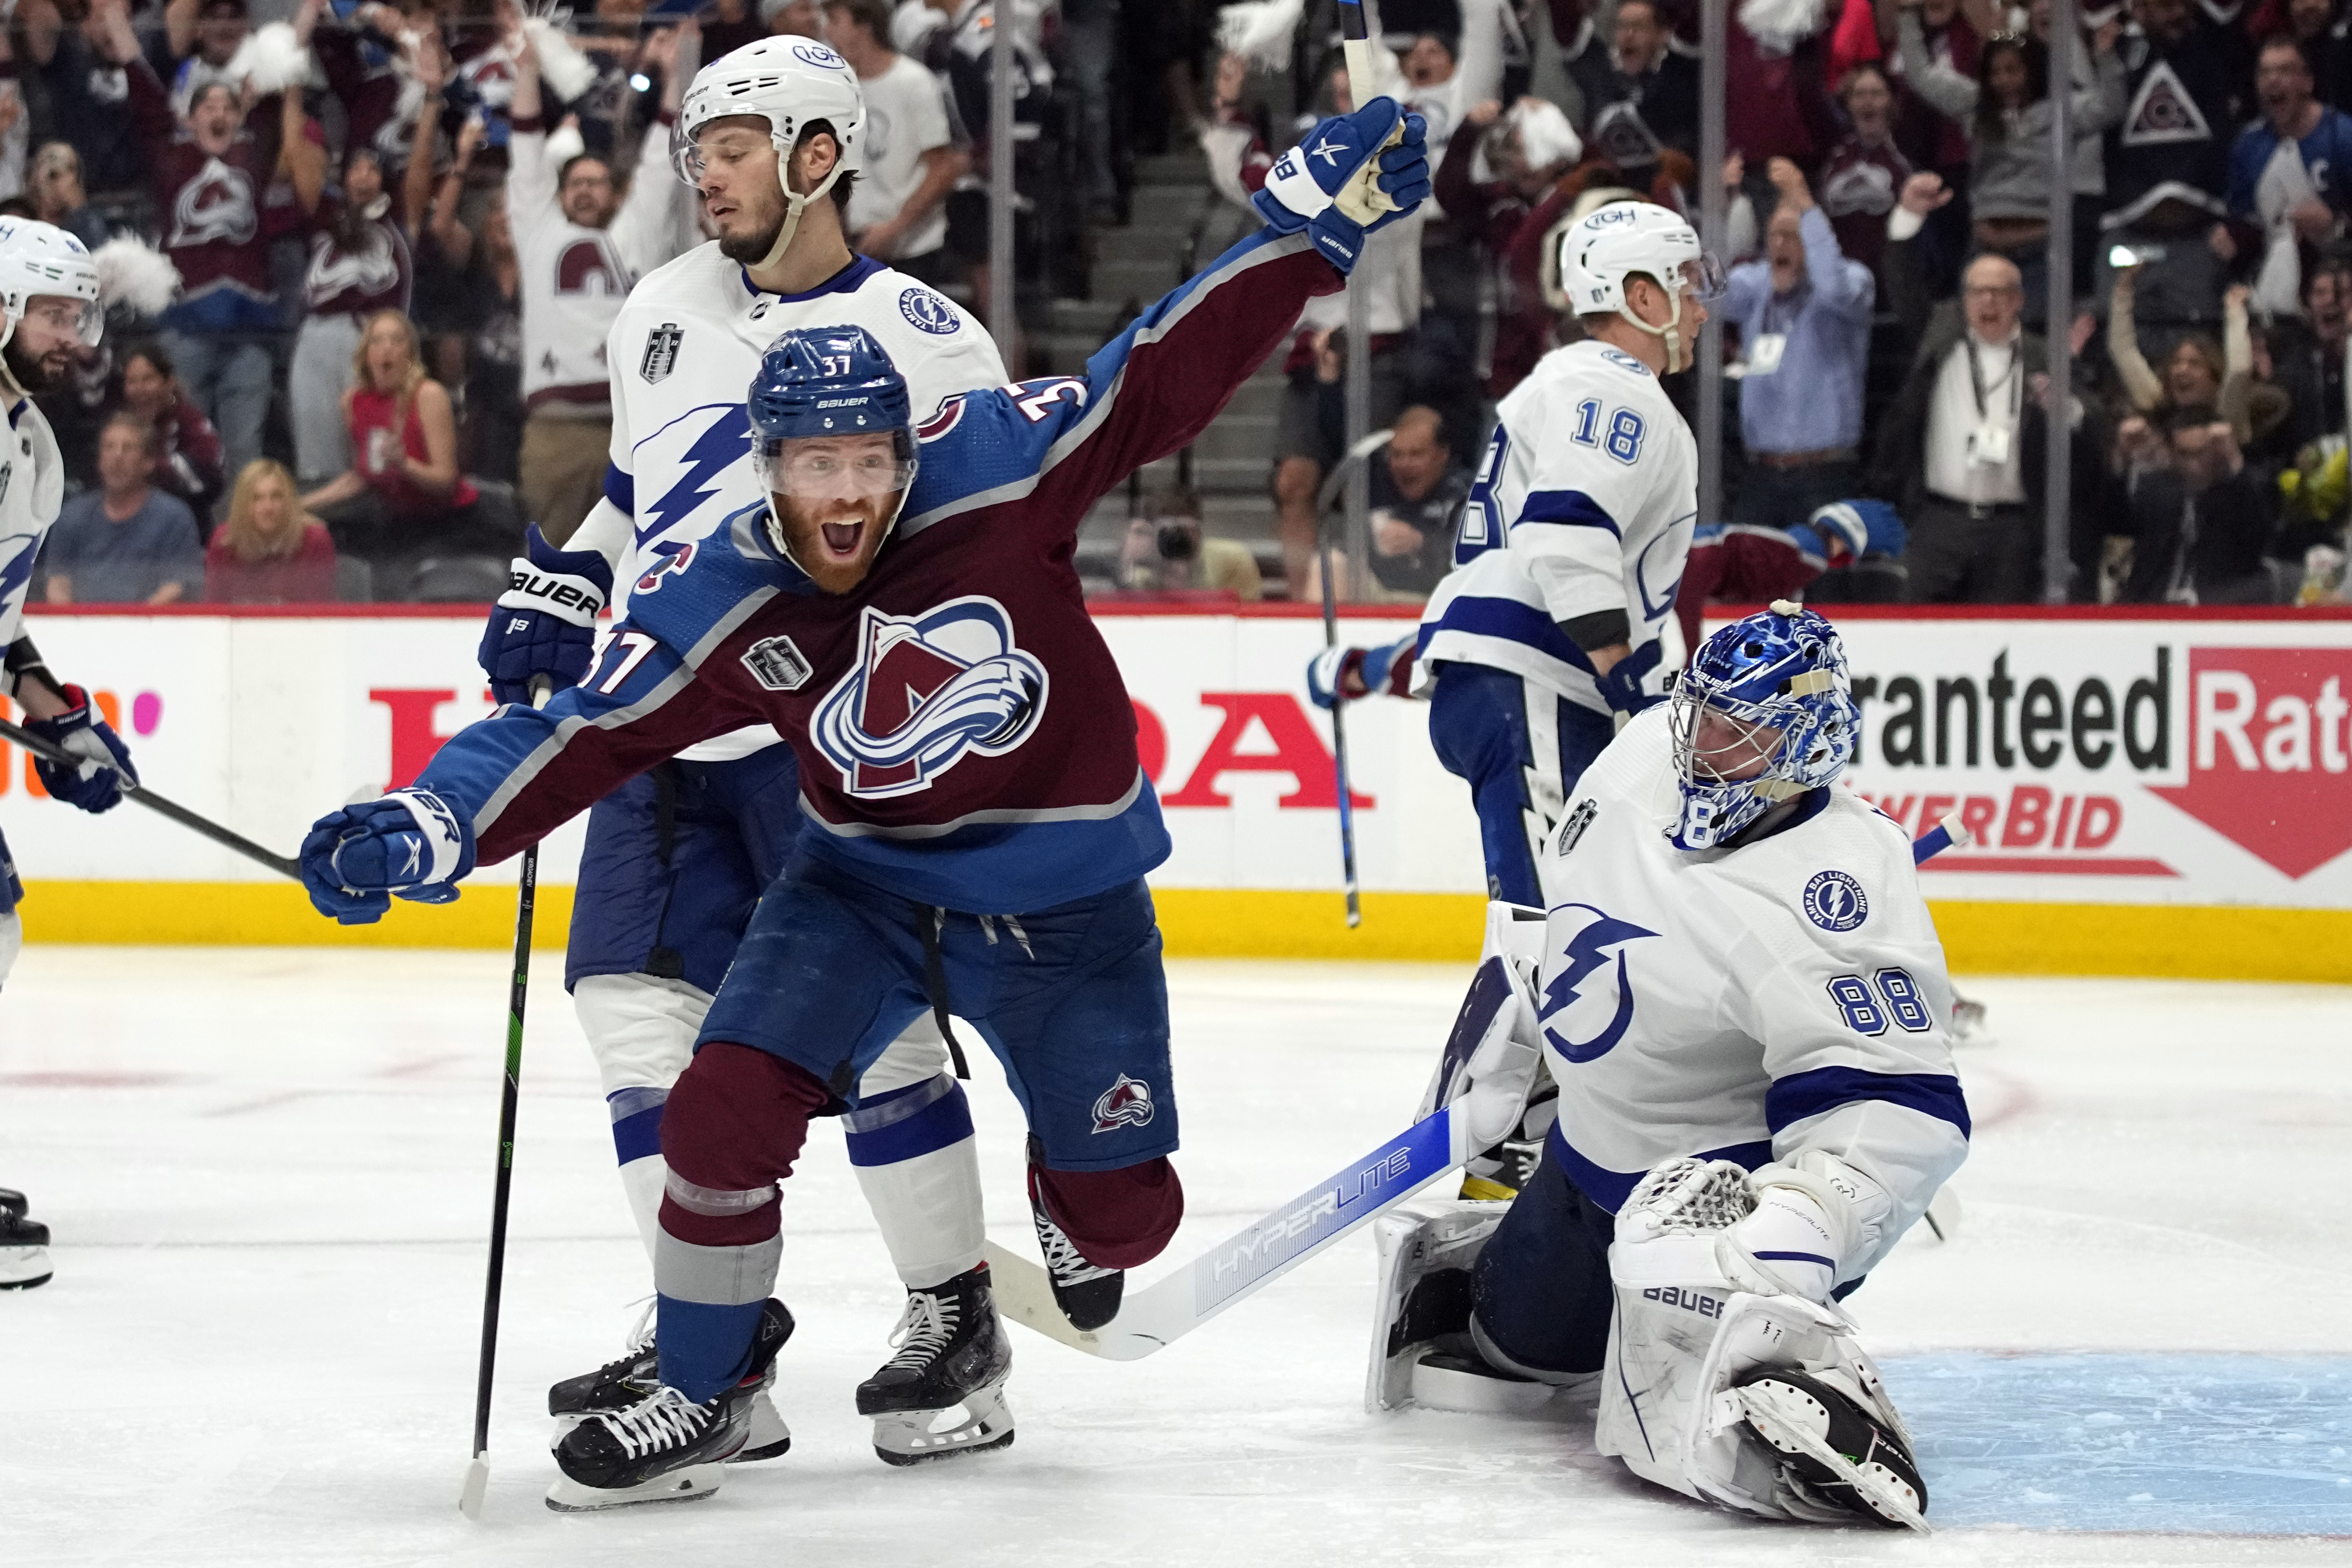 Denver: Witness an Colorado Avalanche National Hockey League Game at Ball  Arena